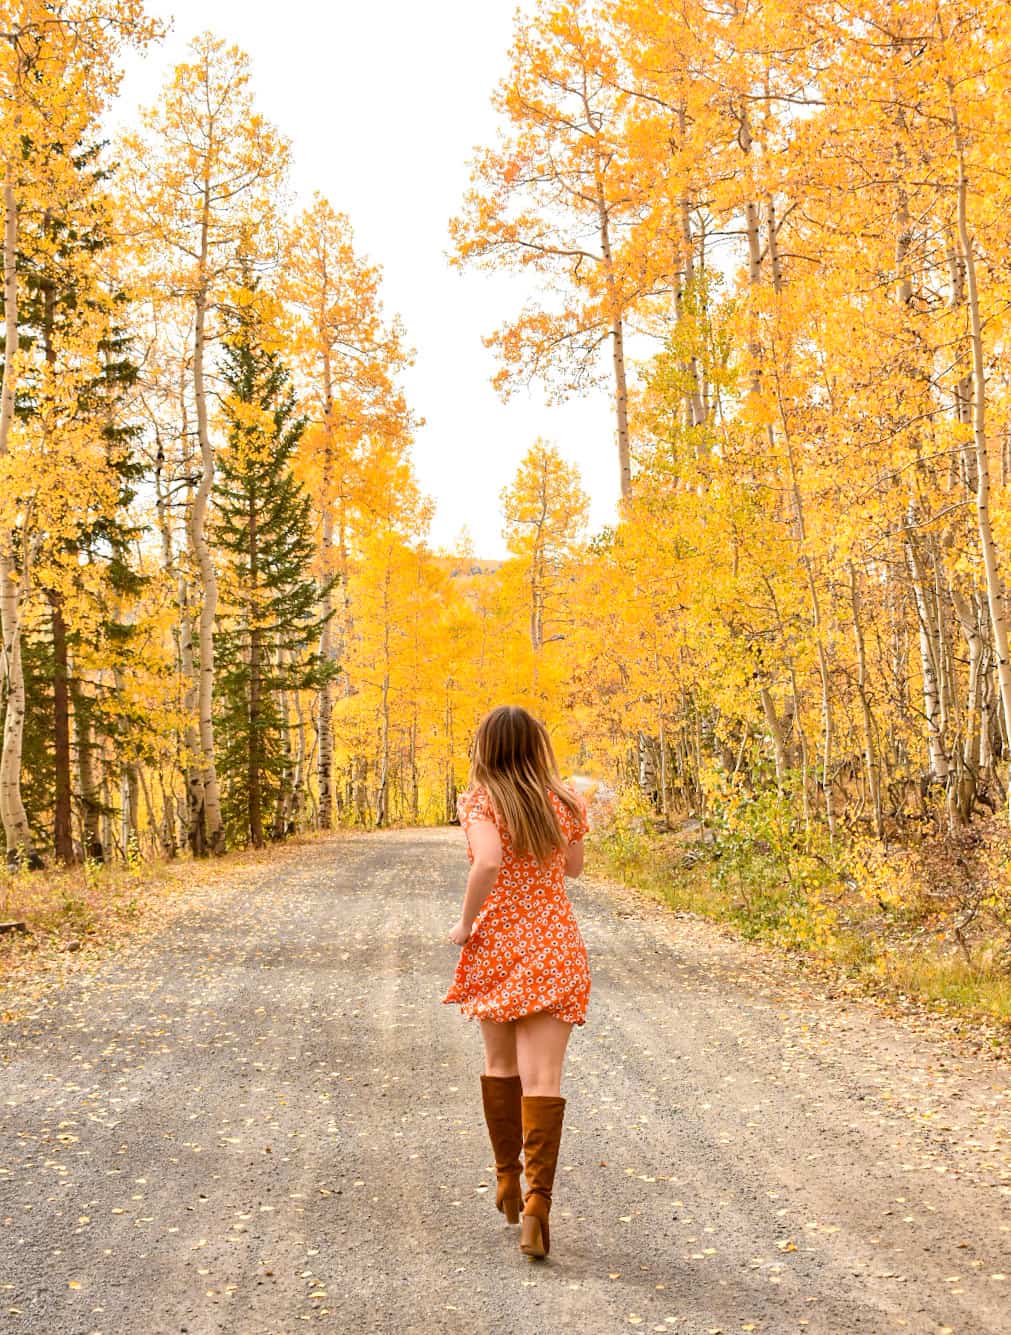 Woman in an orange floral dress and brown suede boots with a chunky heel runs down a dirt road lined with golden aspen trees on one of the best scenic drives in see fall colors in Colorado on the Grand Mesa.